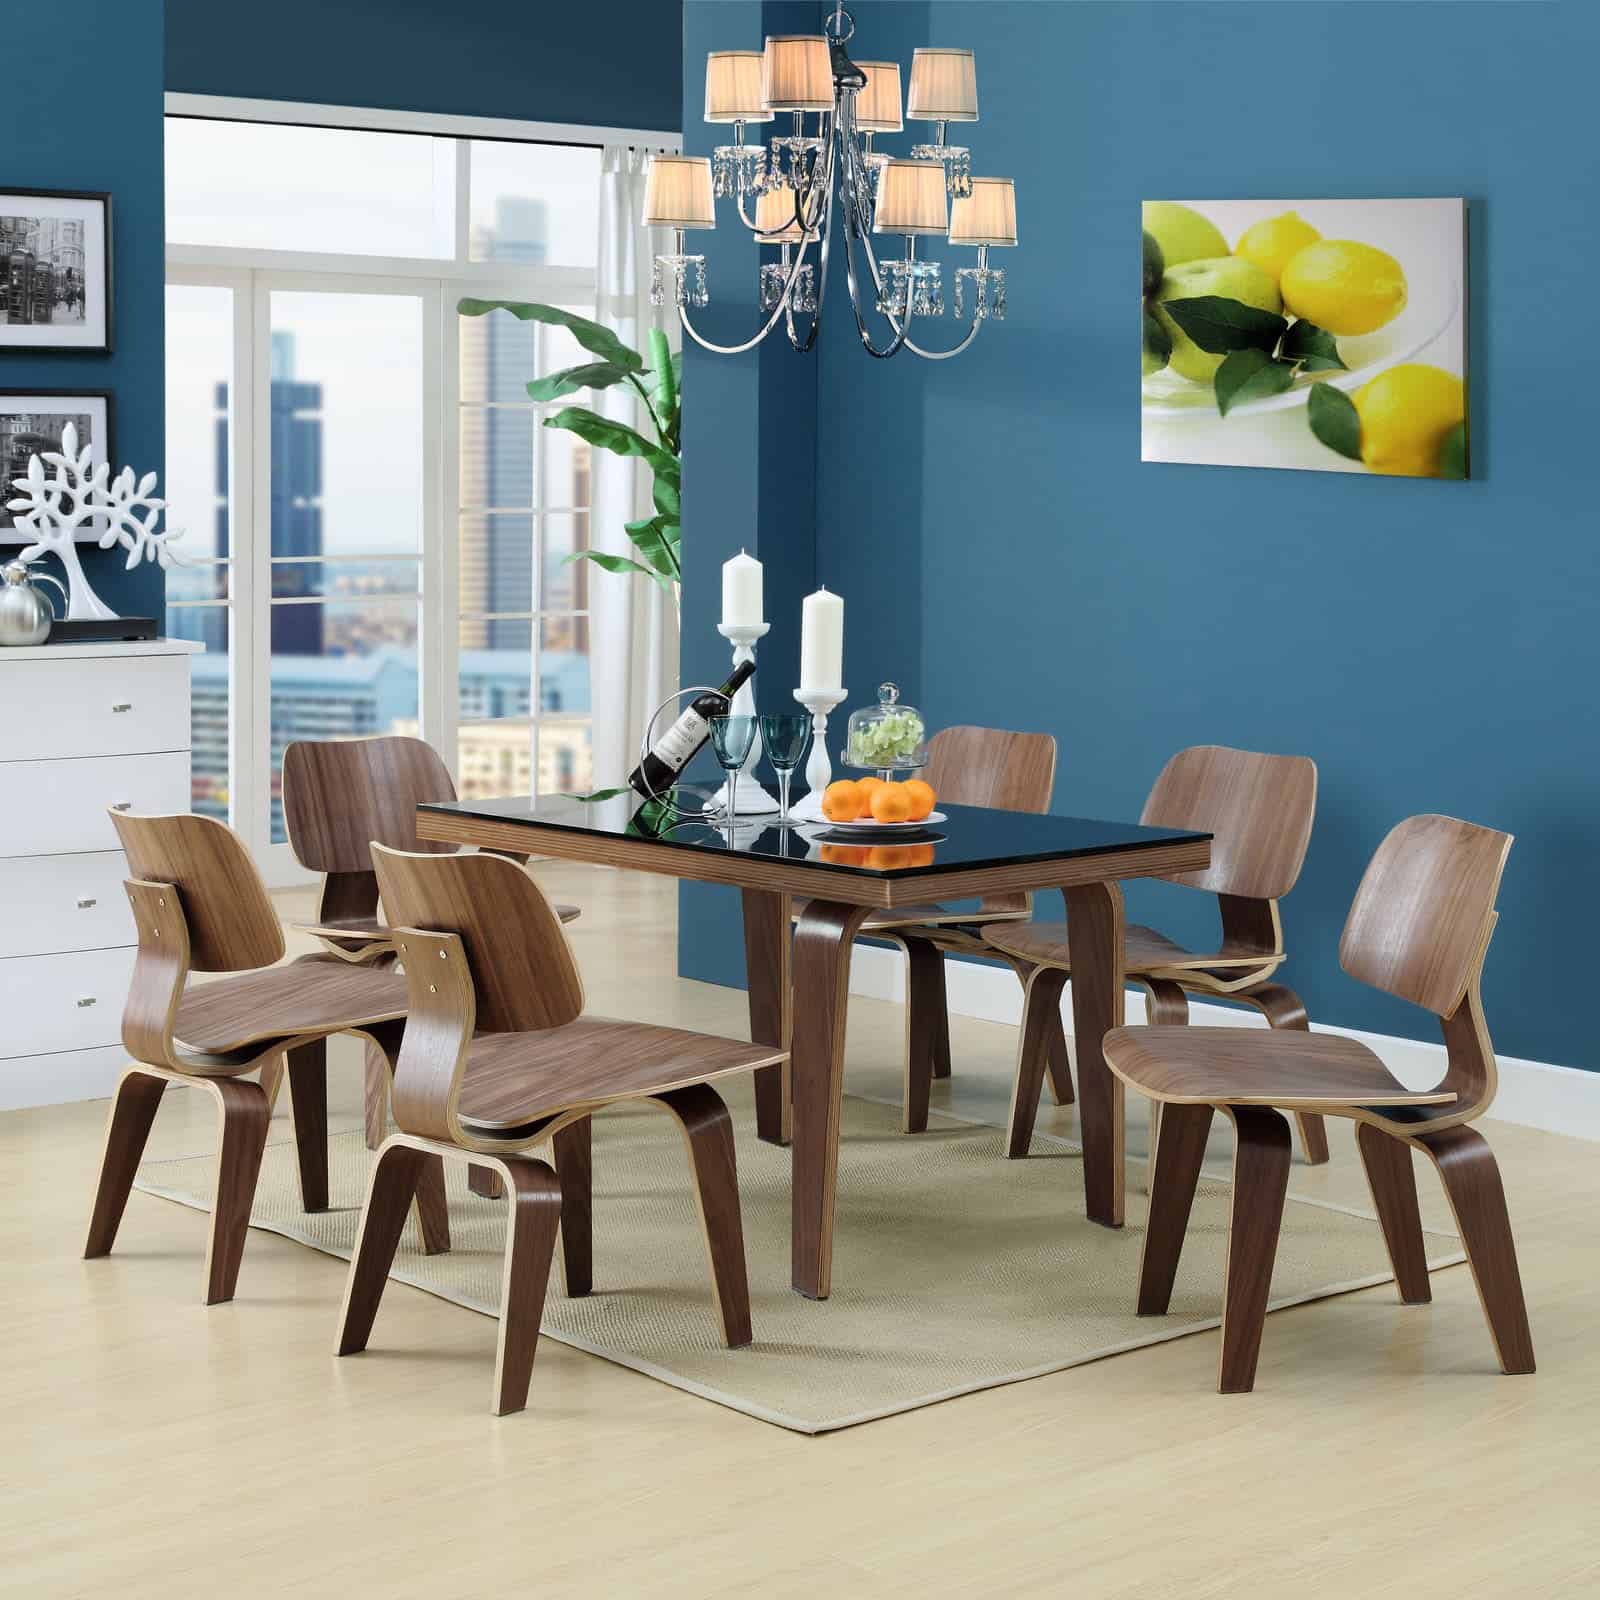 These Molded Chairs Are Perfect for Businesses And Homes